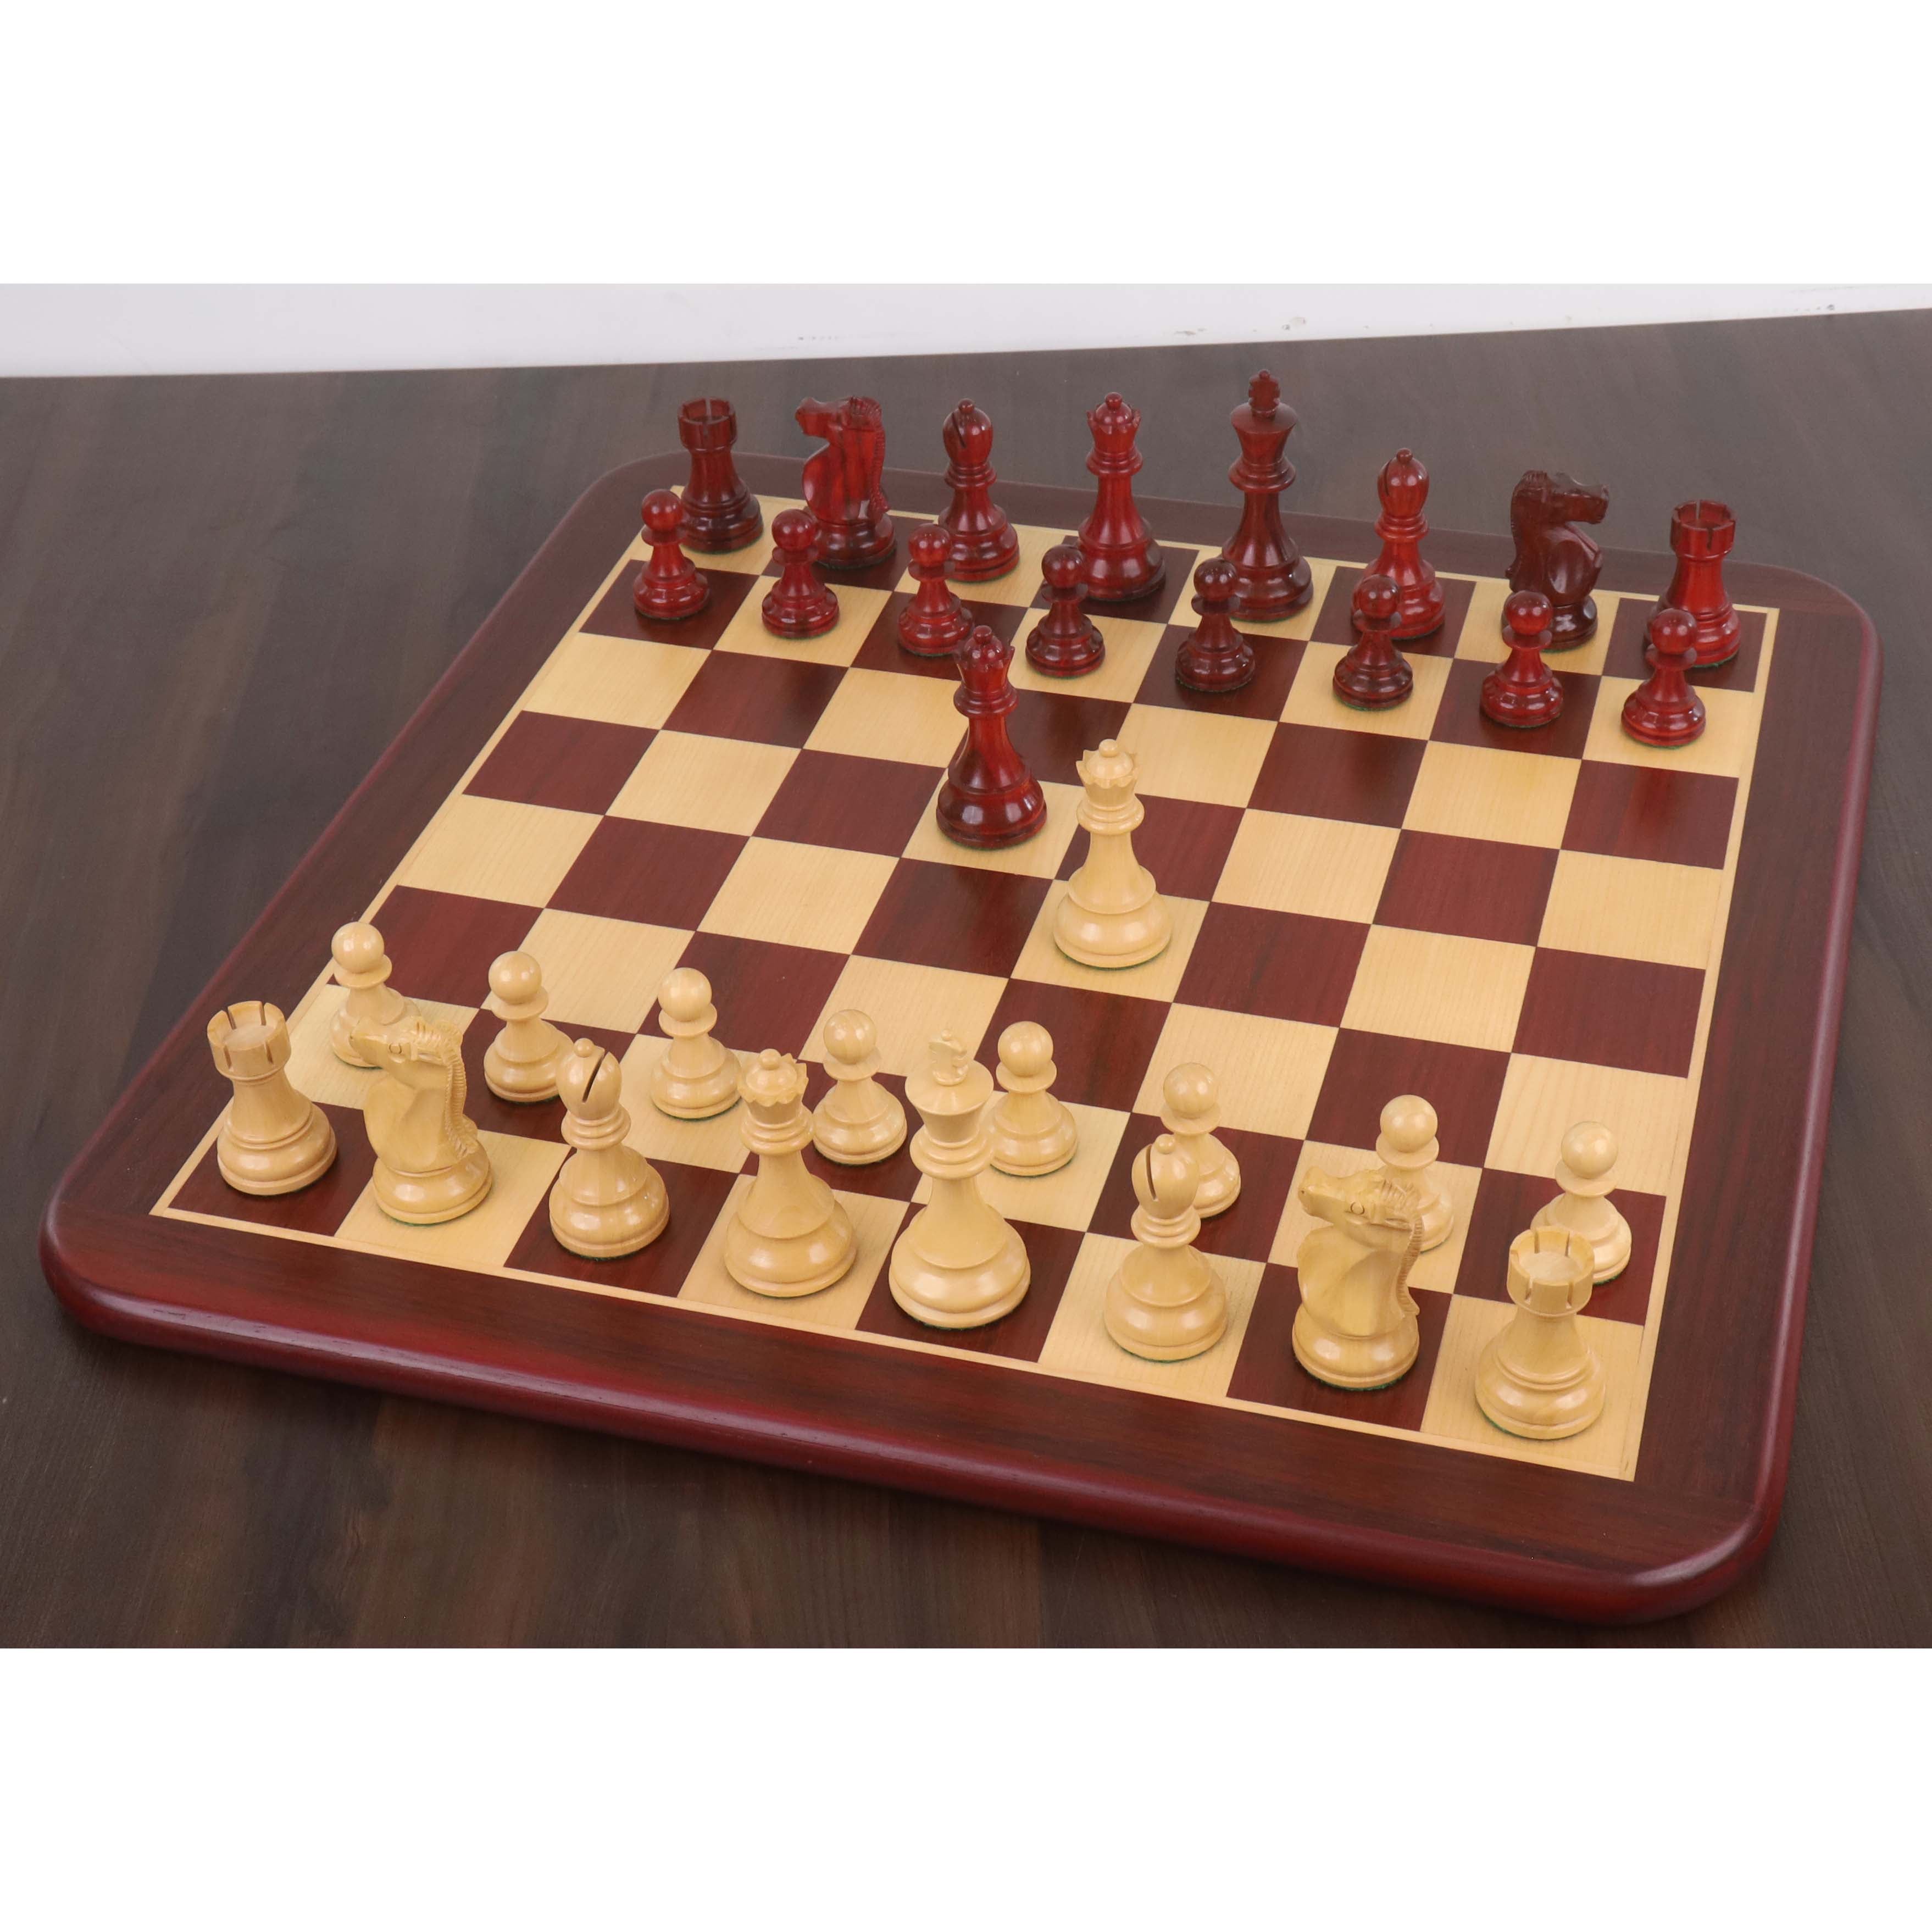 1972 Championship Fischer Spassky Chess Set- Chess Pieces Only - Double Weighted Bud Rosewood